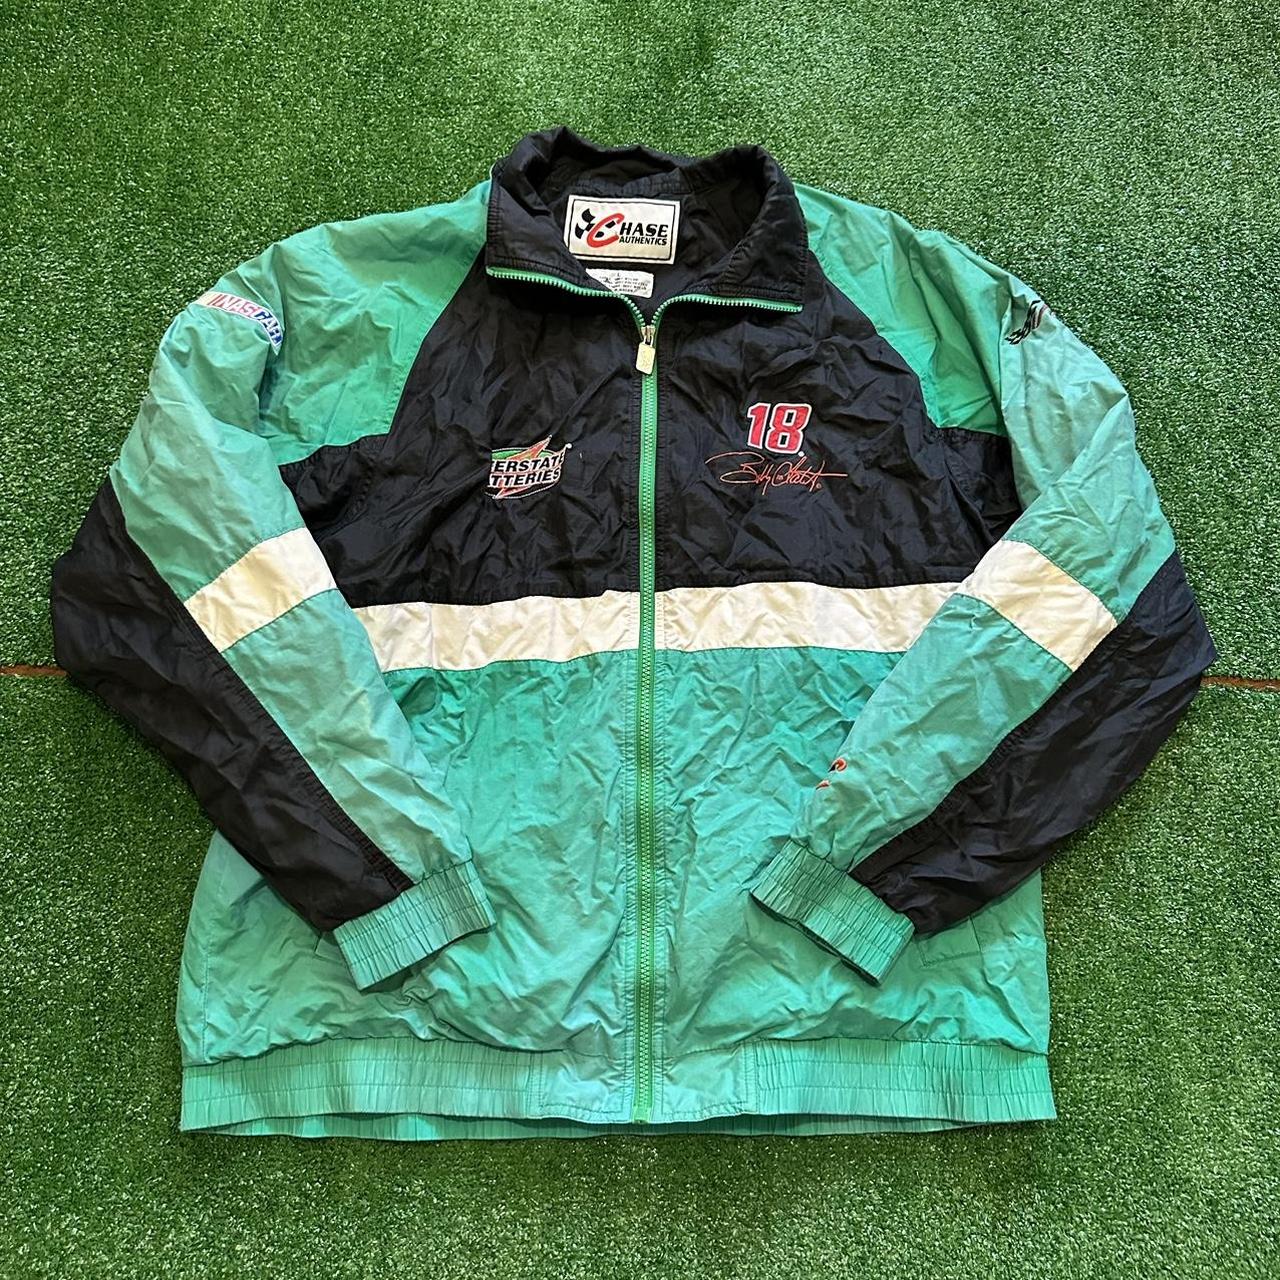 Show your love for classic American racing with this... - Depop